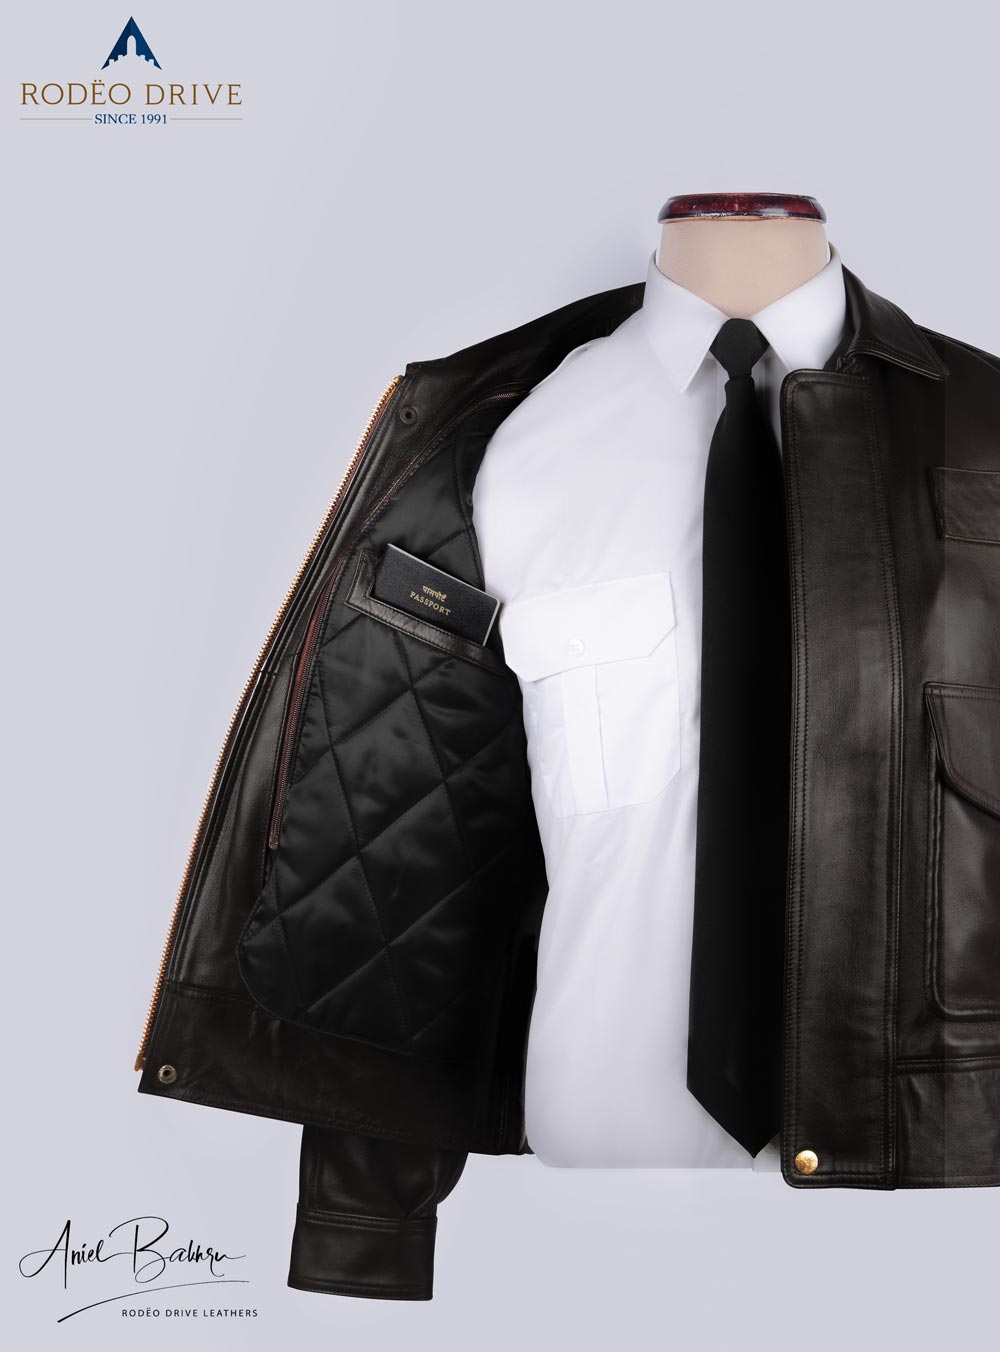 Inside pocket image of BROWN UNIFORM LEATHER JACKET. Convenient for carrying passport.